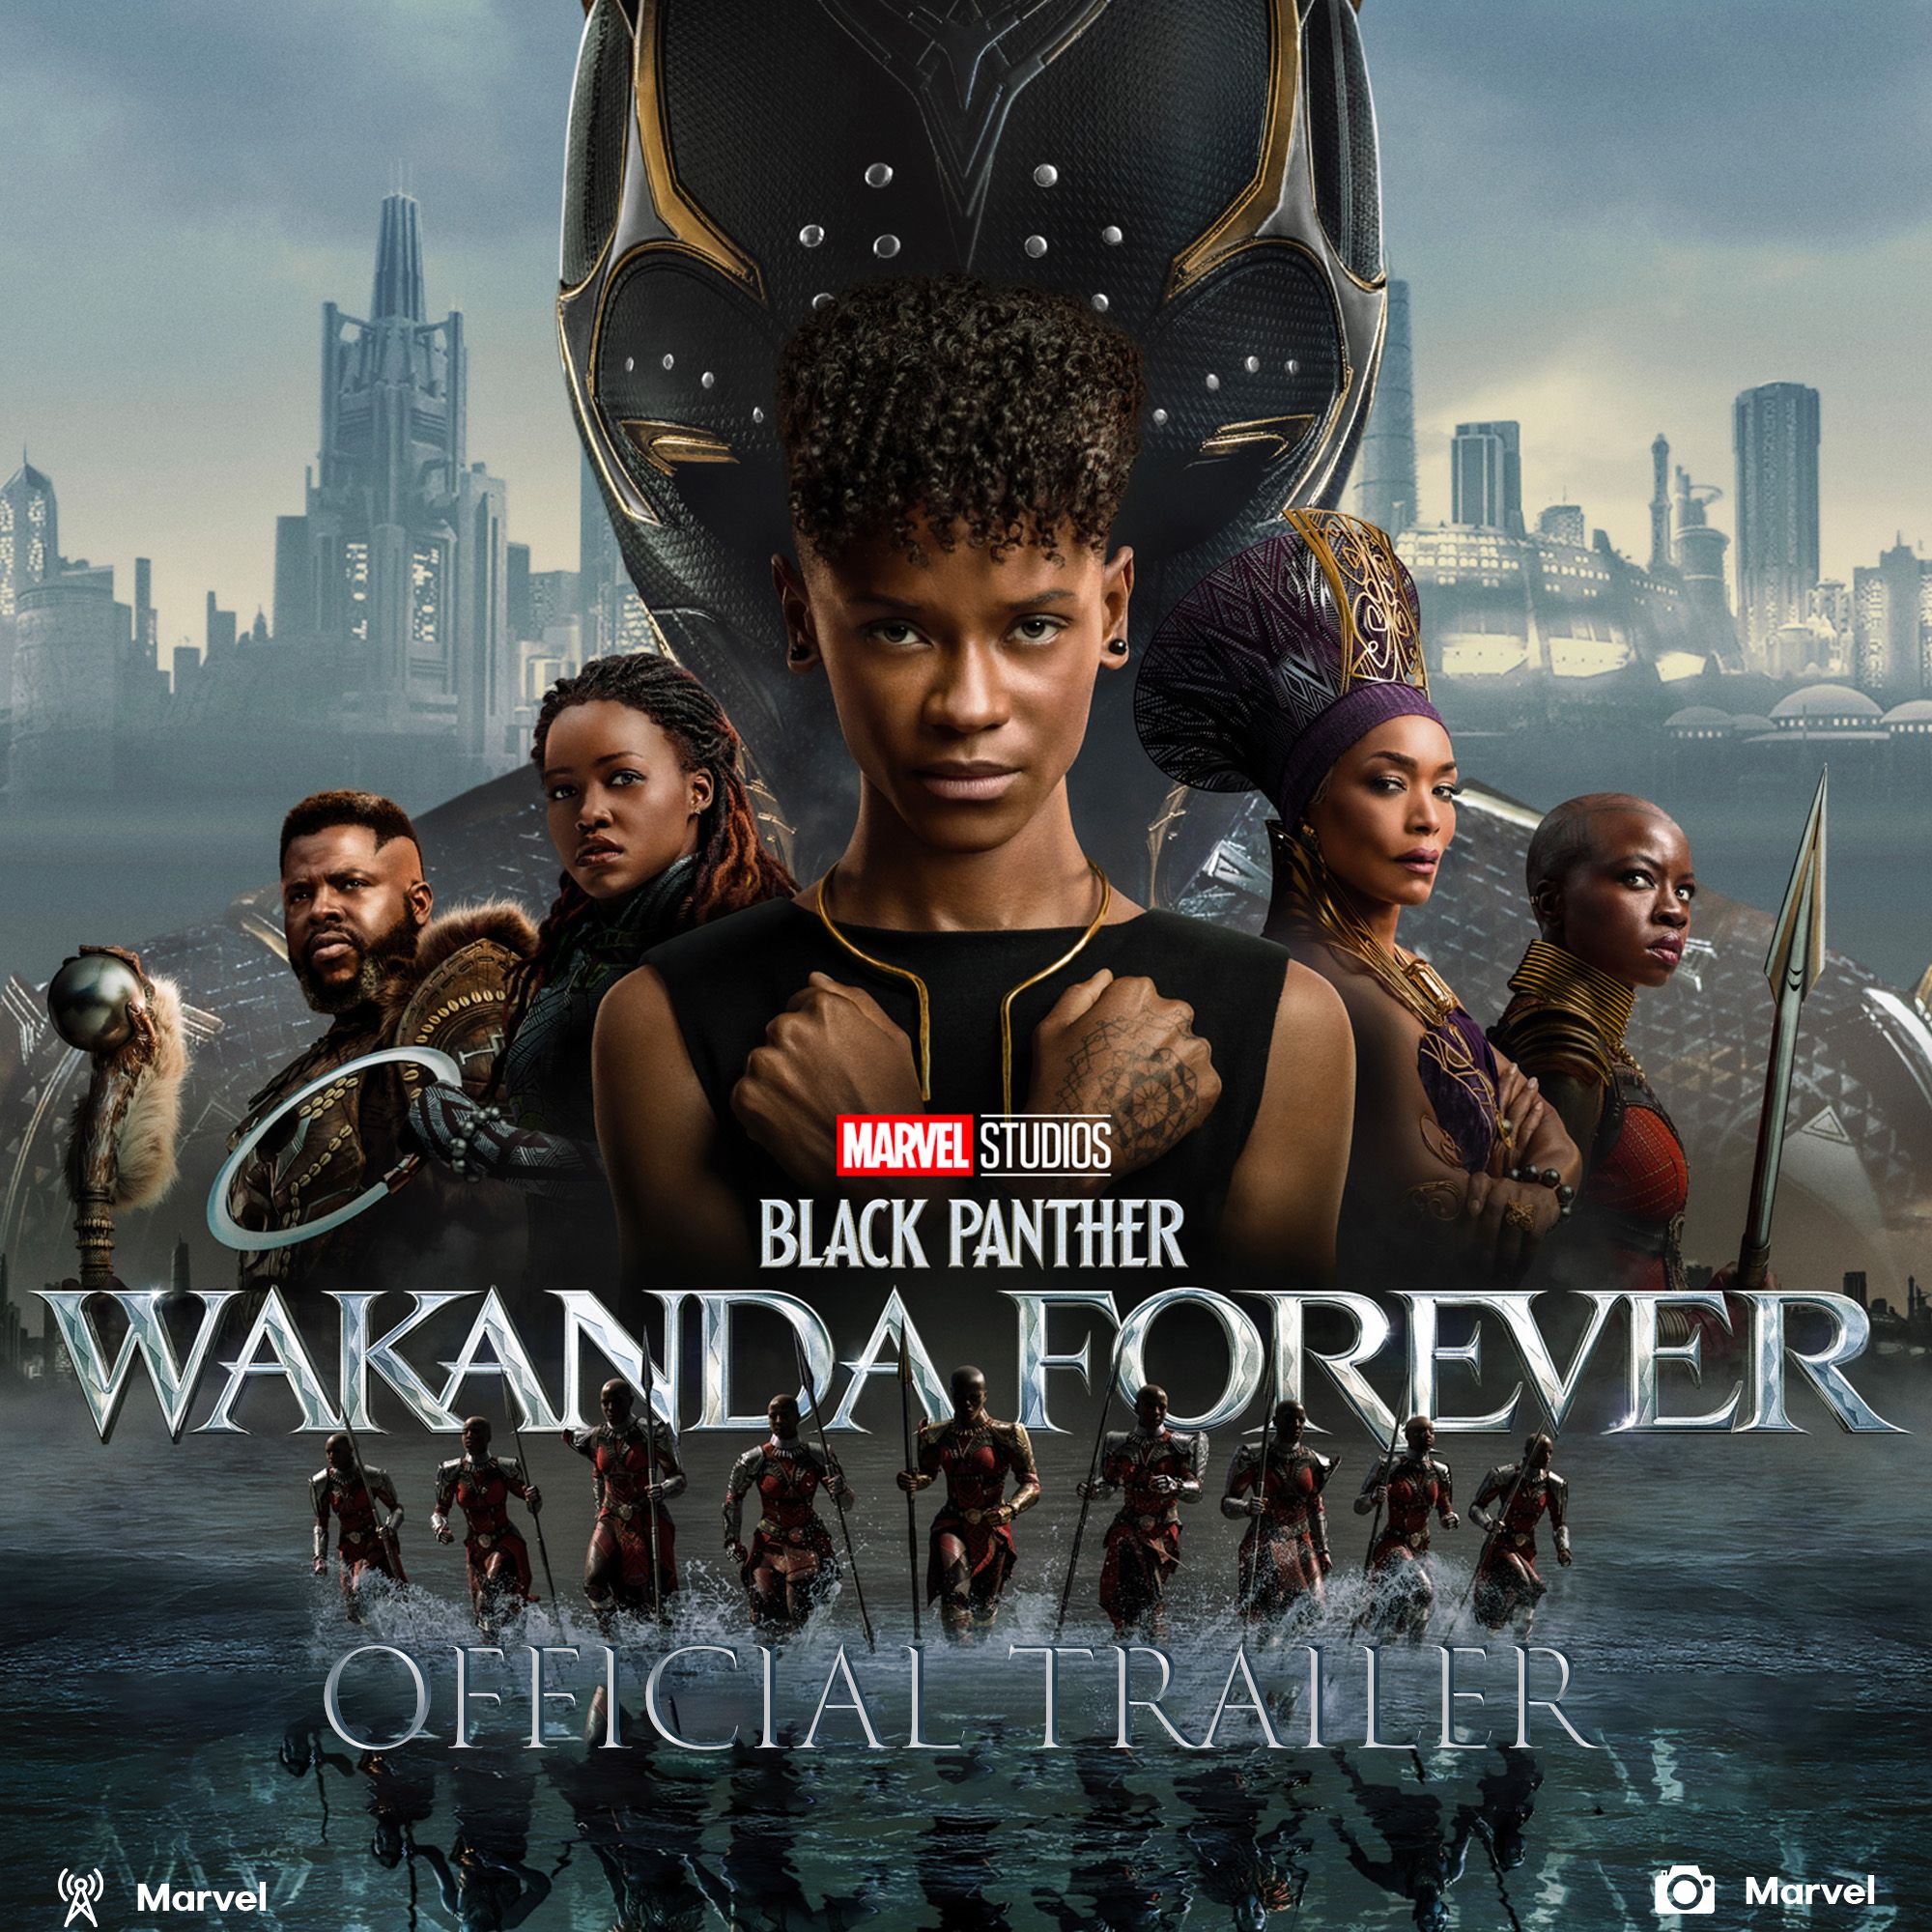 Black Panther Wakanda forever - official trailer